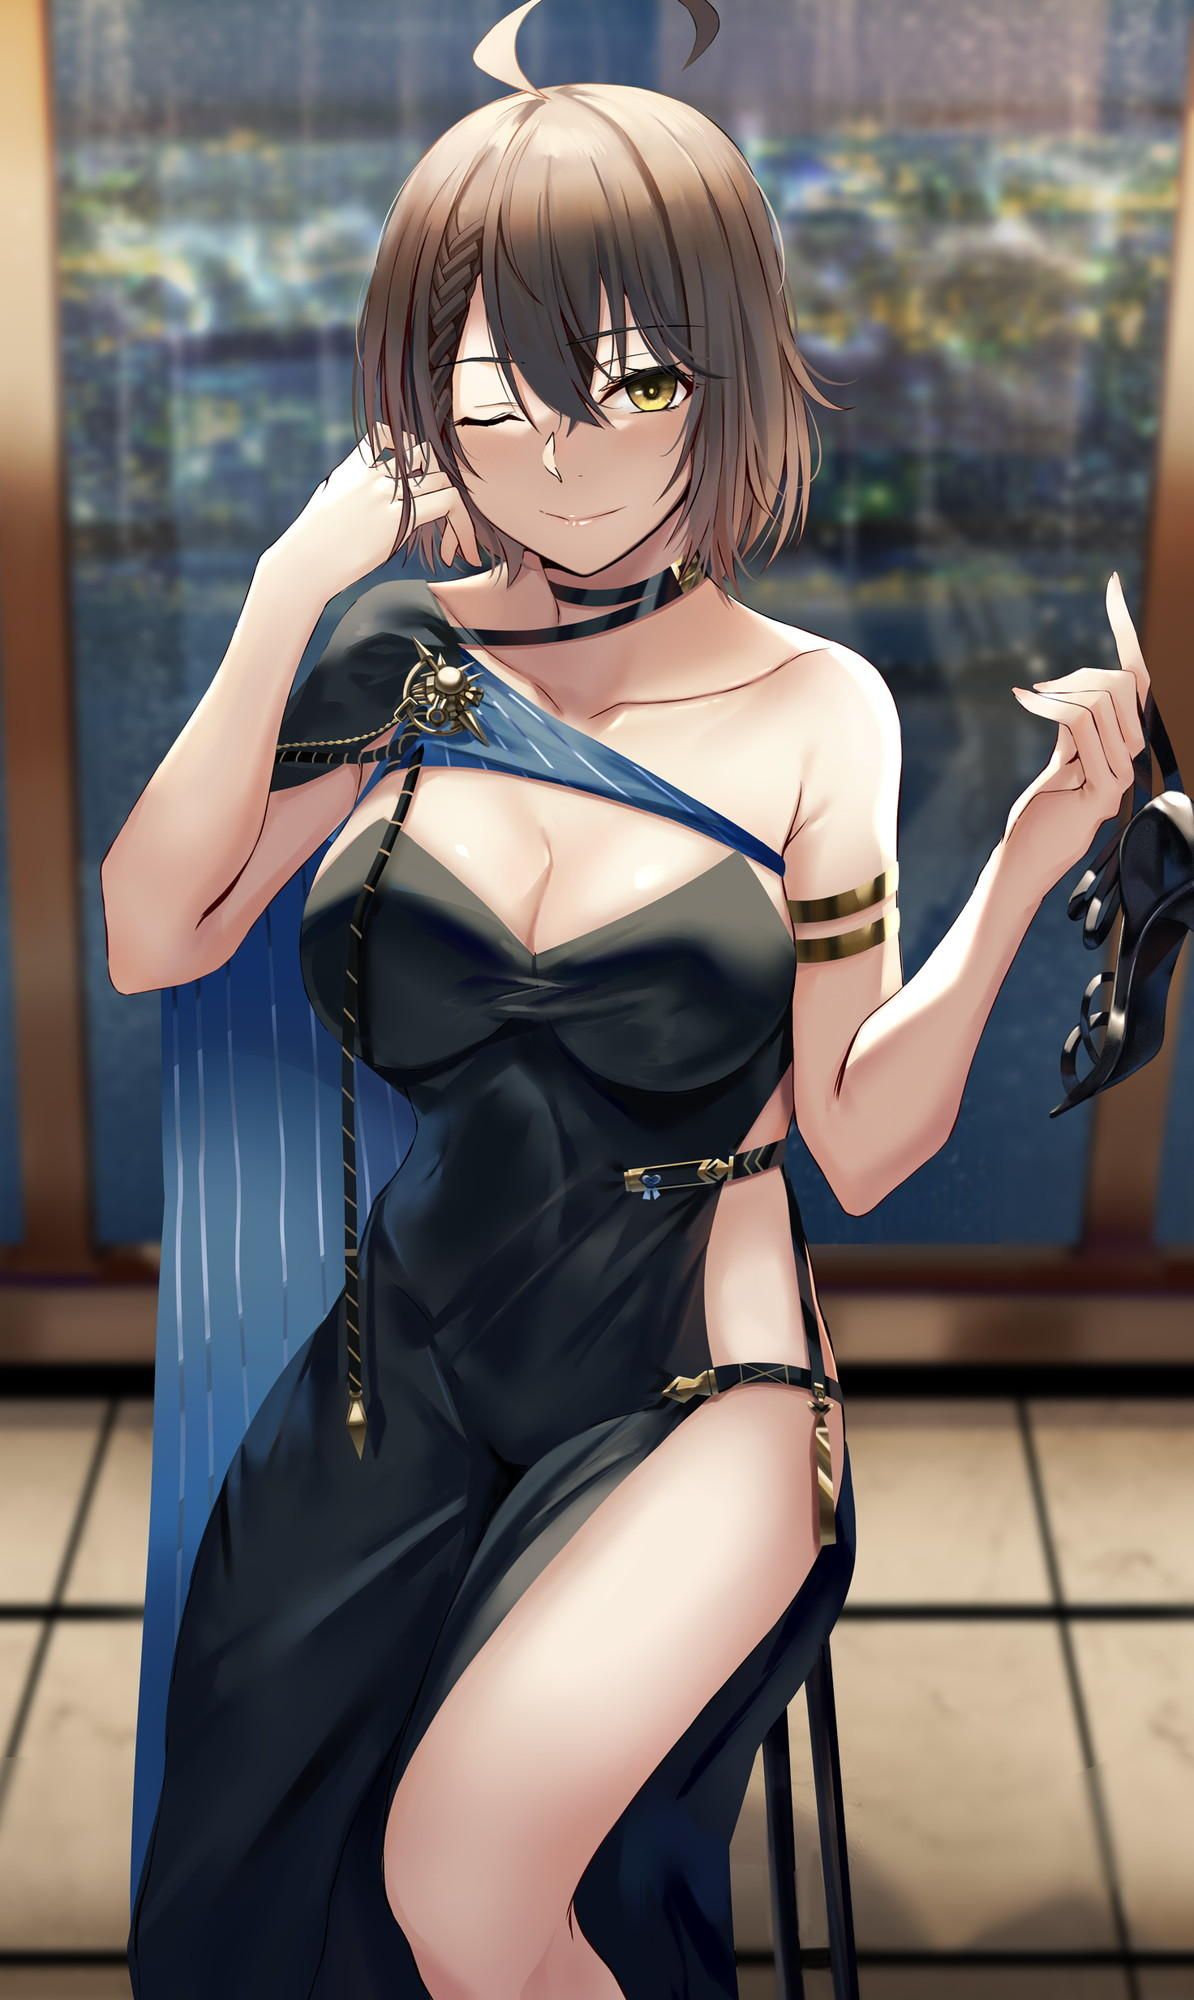 【Erotic images】I collected cute Baltimore images, but they are too erotic ... (Azure Lane) 17